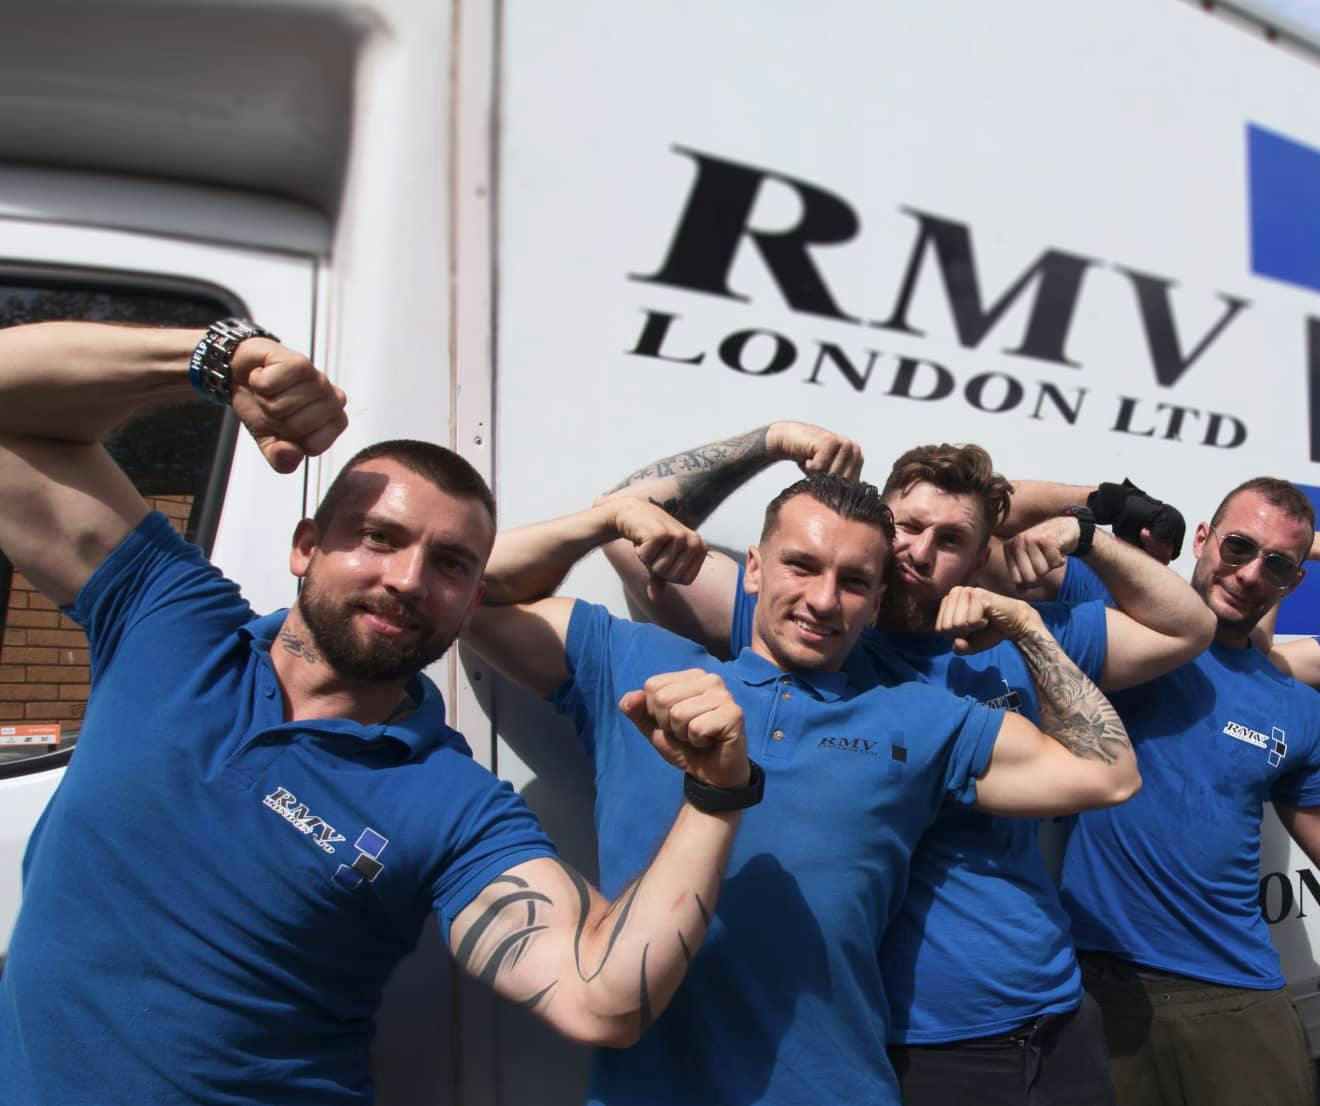 The expert removals team